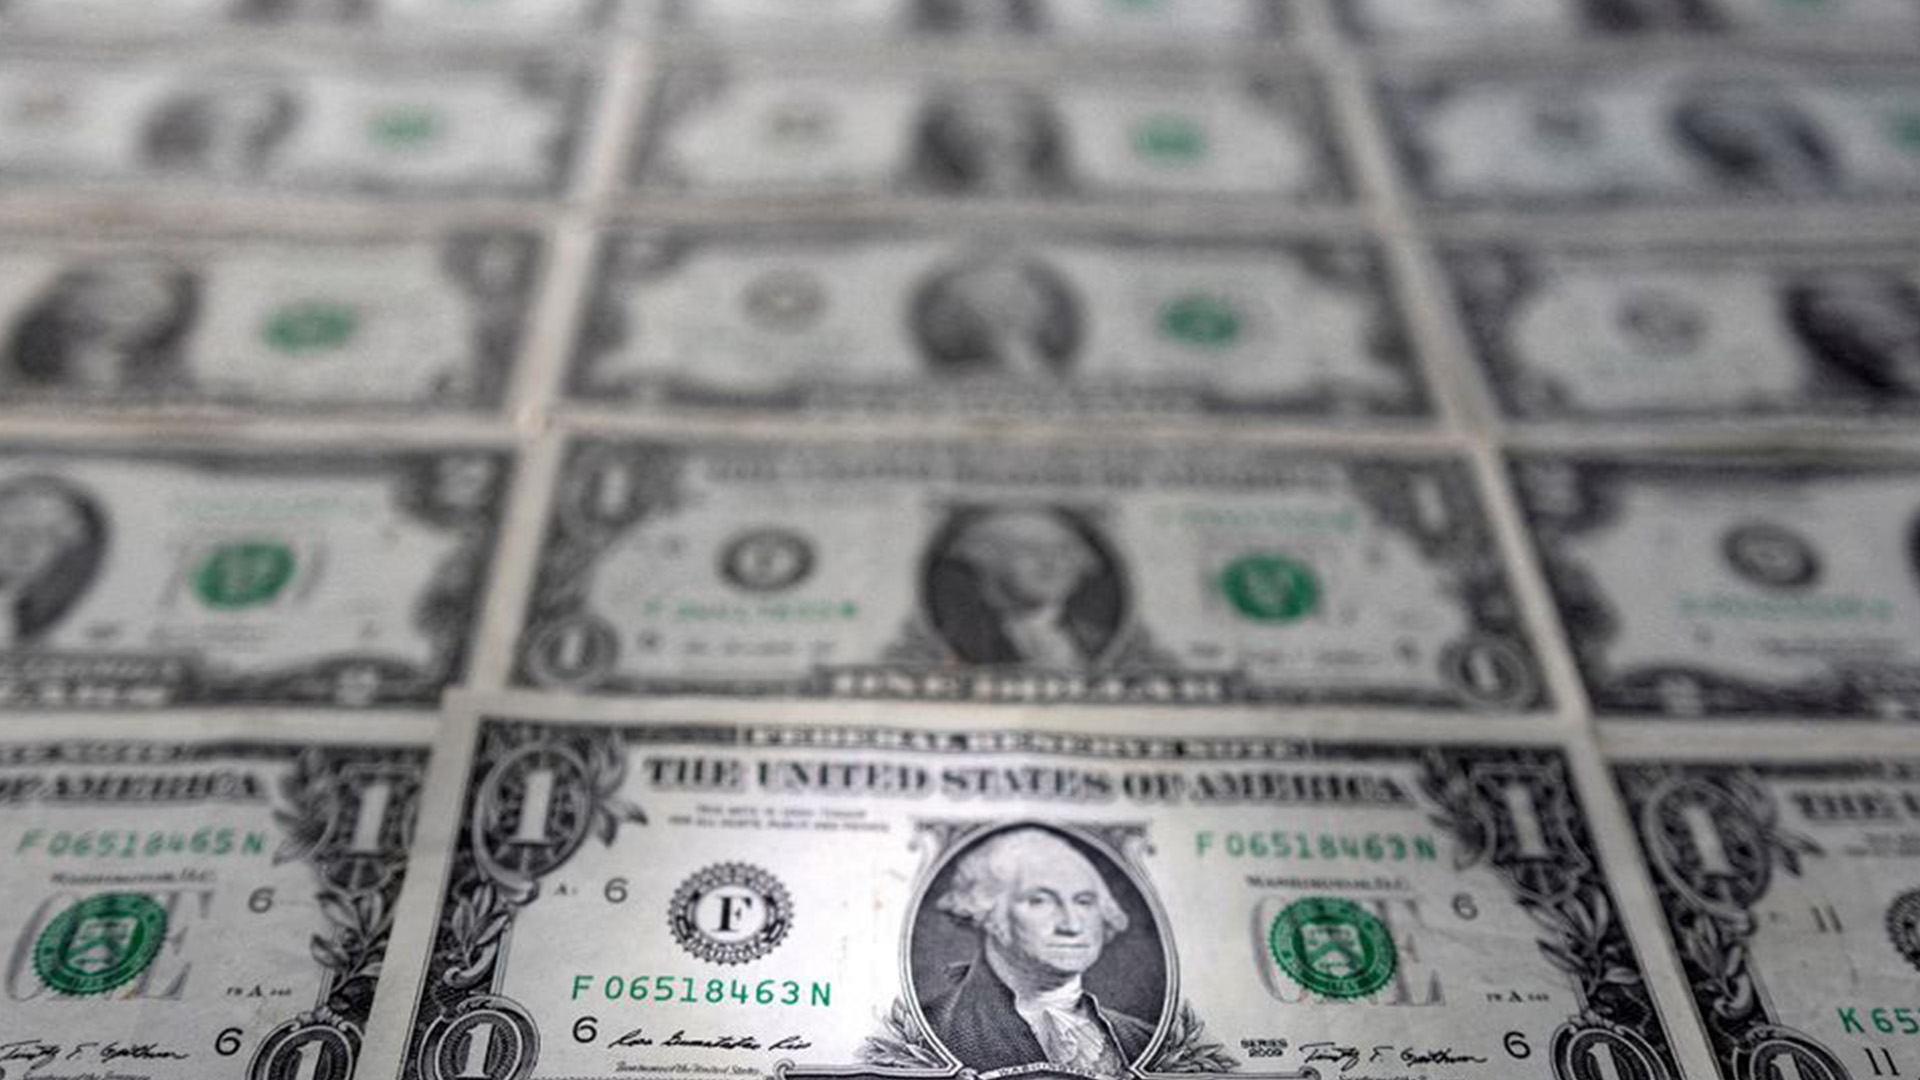  U.S. dollar banknotes are displayed in this illustration taken, February 14, 2022. REUTERS/Dado Ruvic